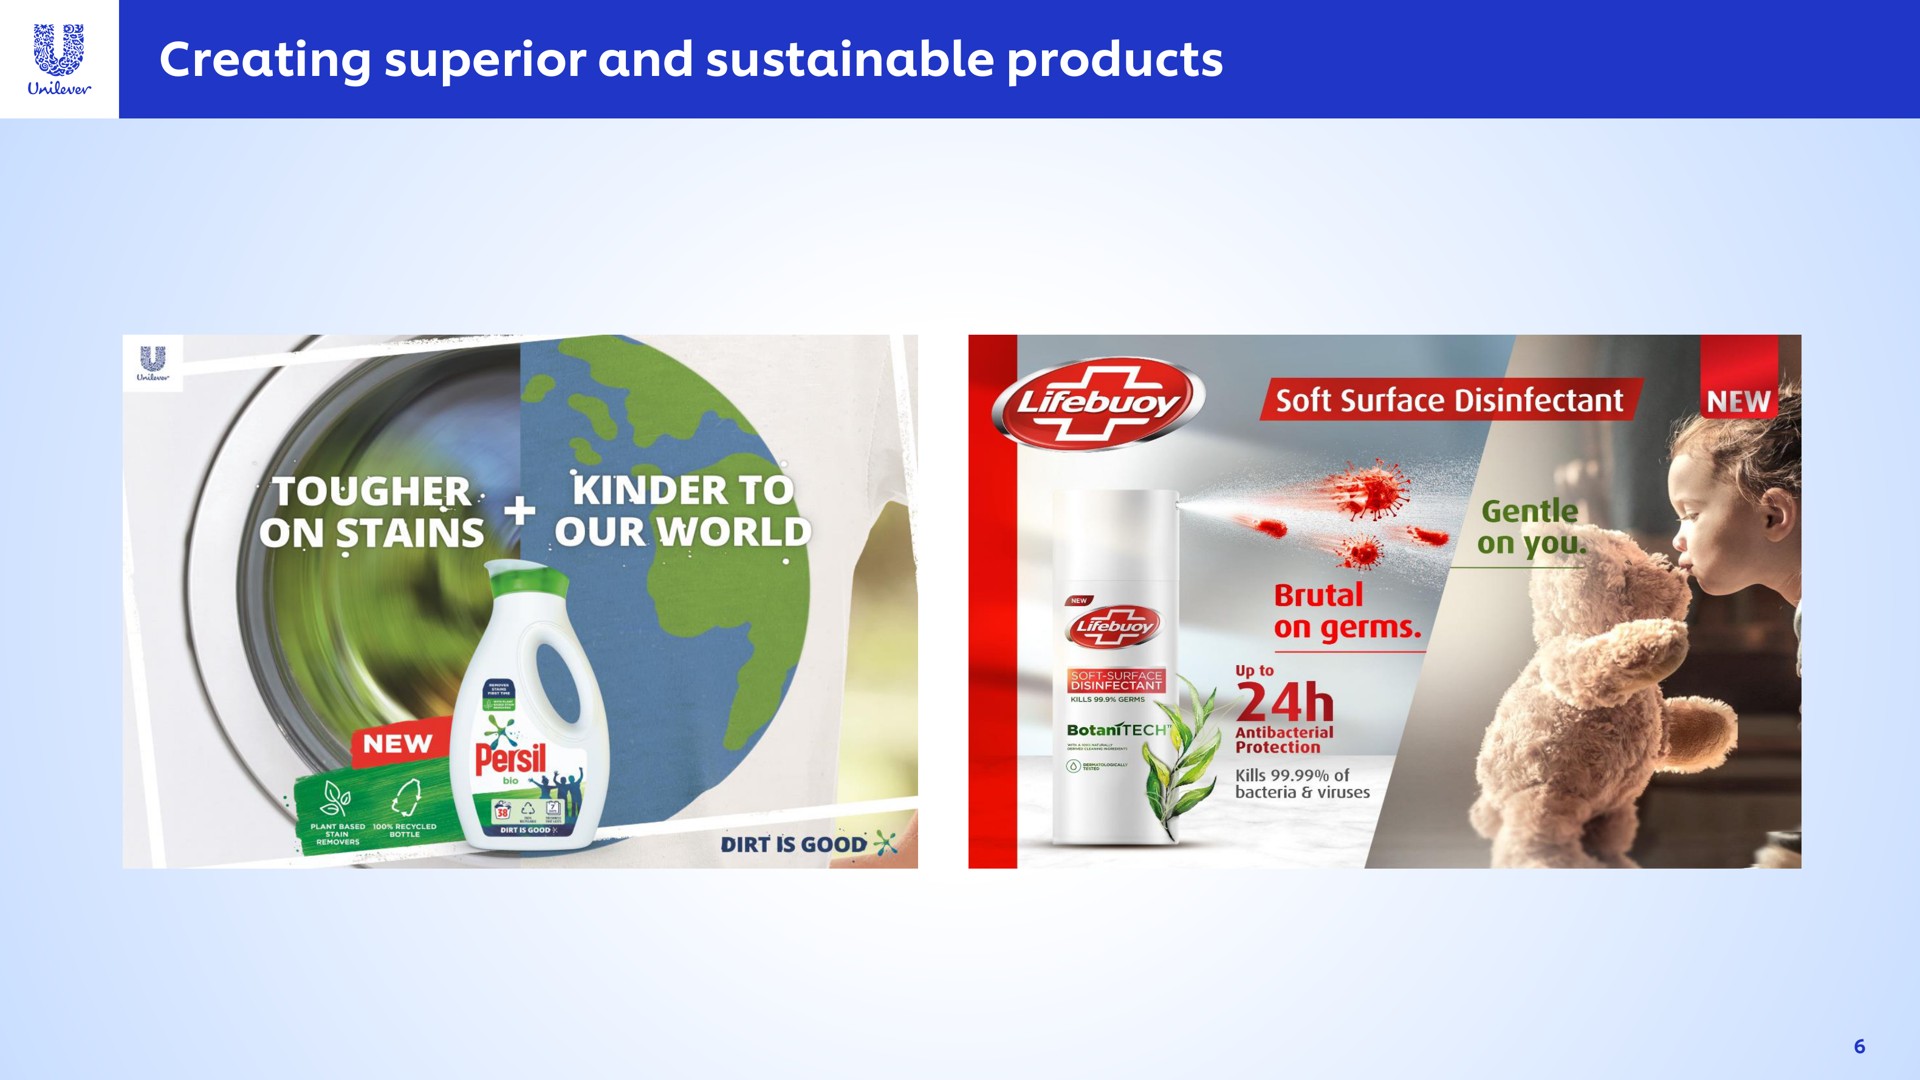 creating superior and sustainable products on stains | Unilever